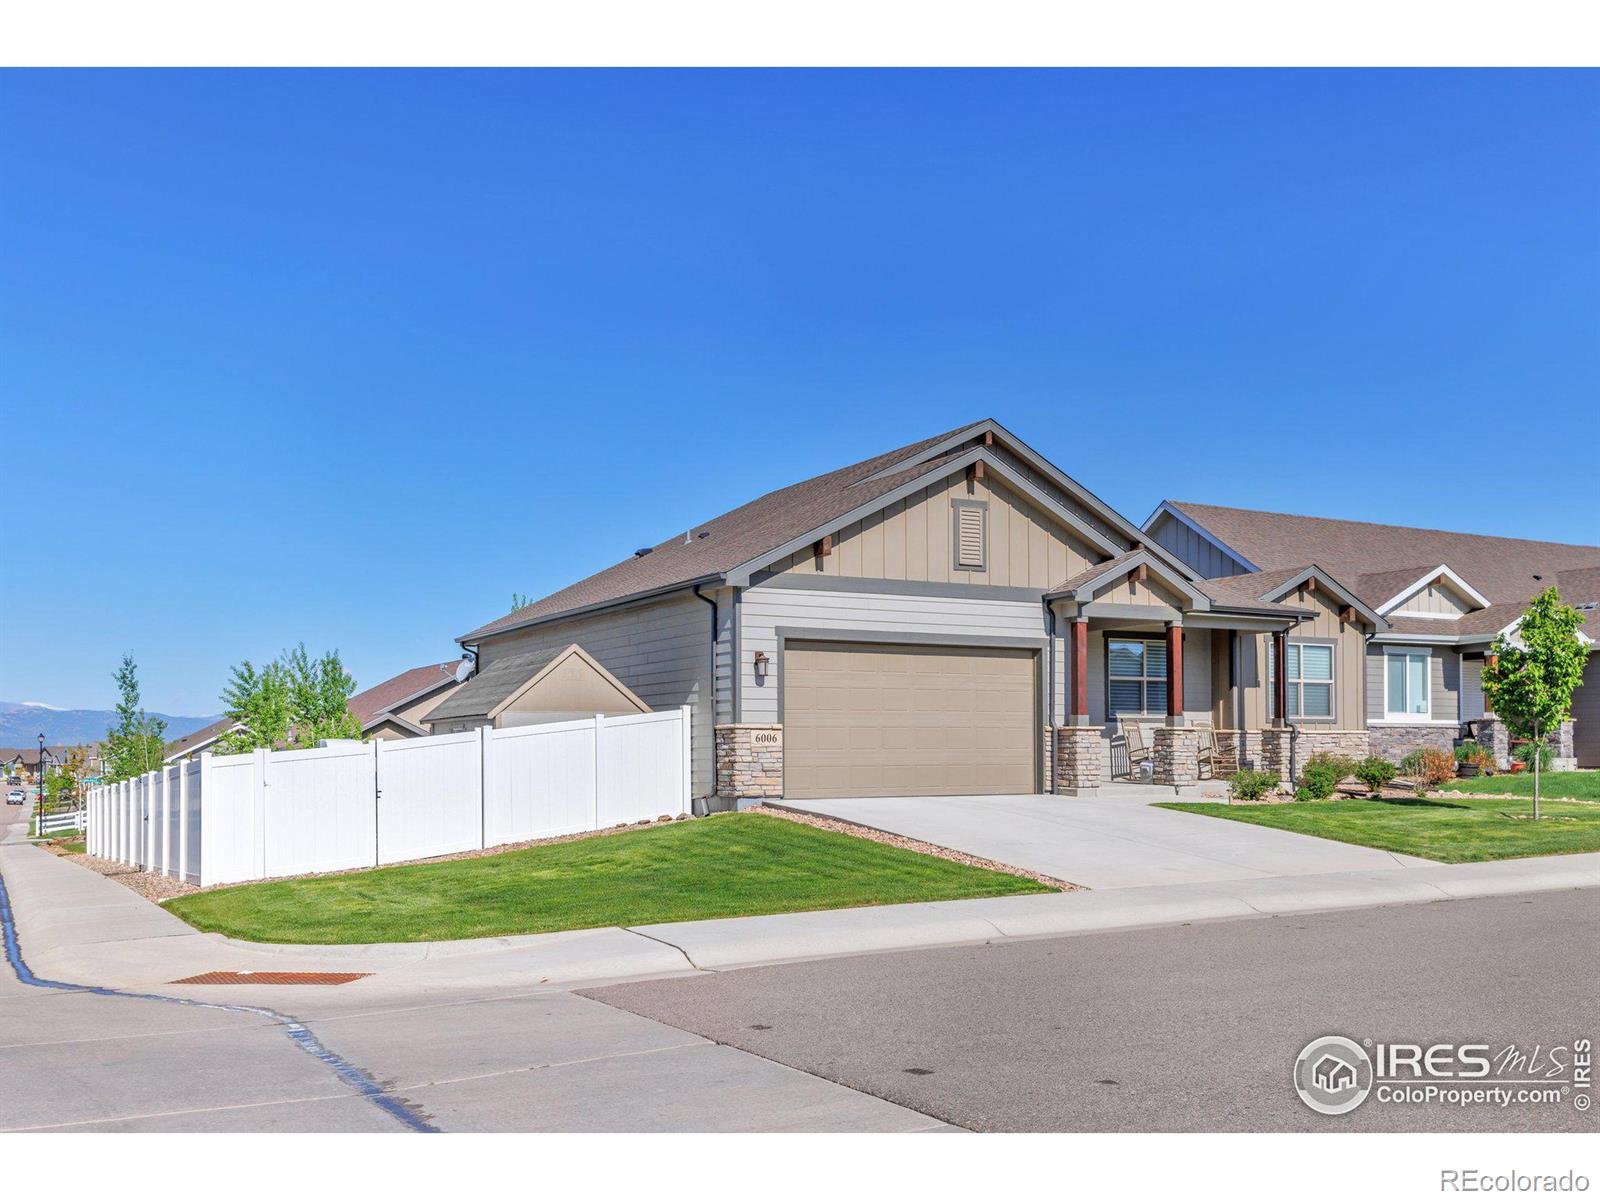 Report Image for 6006  Chantry Drive,Windsor, Colorado